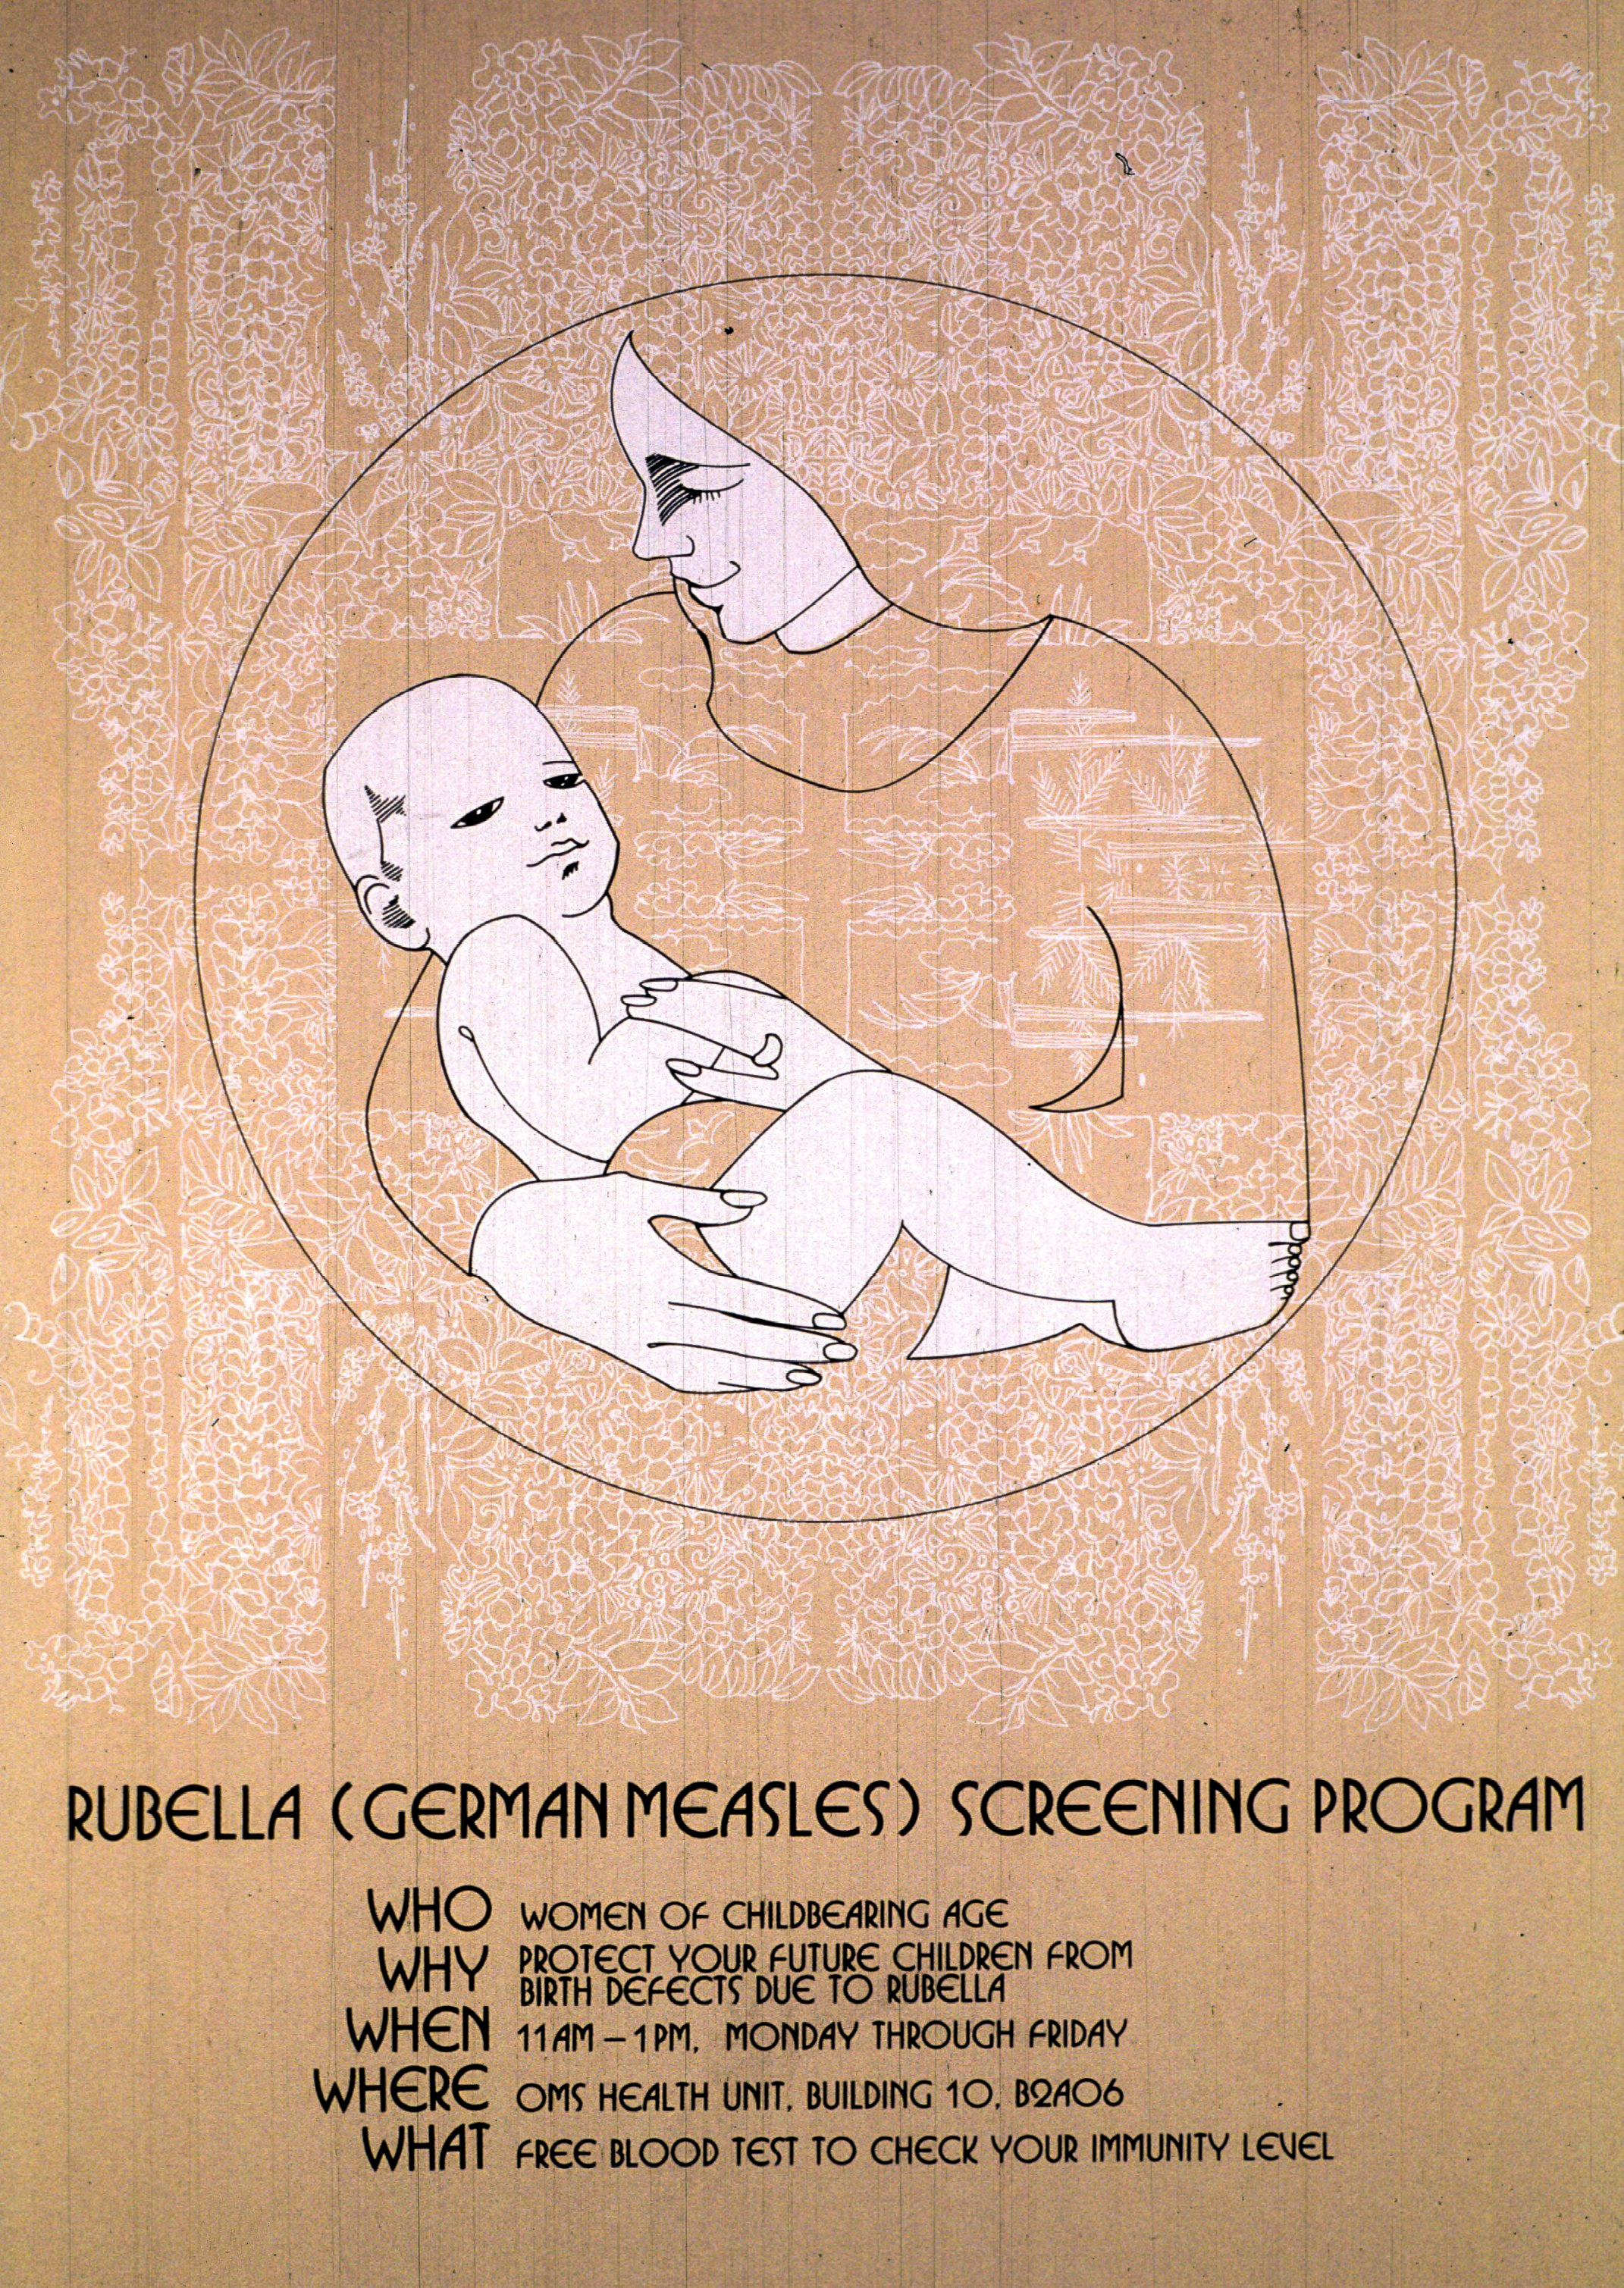 a poster rendered in a popular German Artist aesthetic from the turn of the century that lists the dates and times of a rubella screening  for women of childbearing age